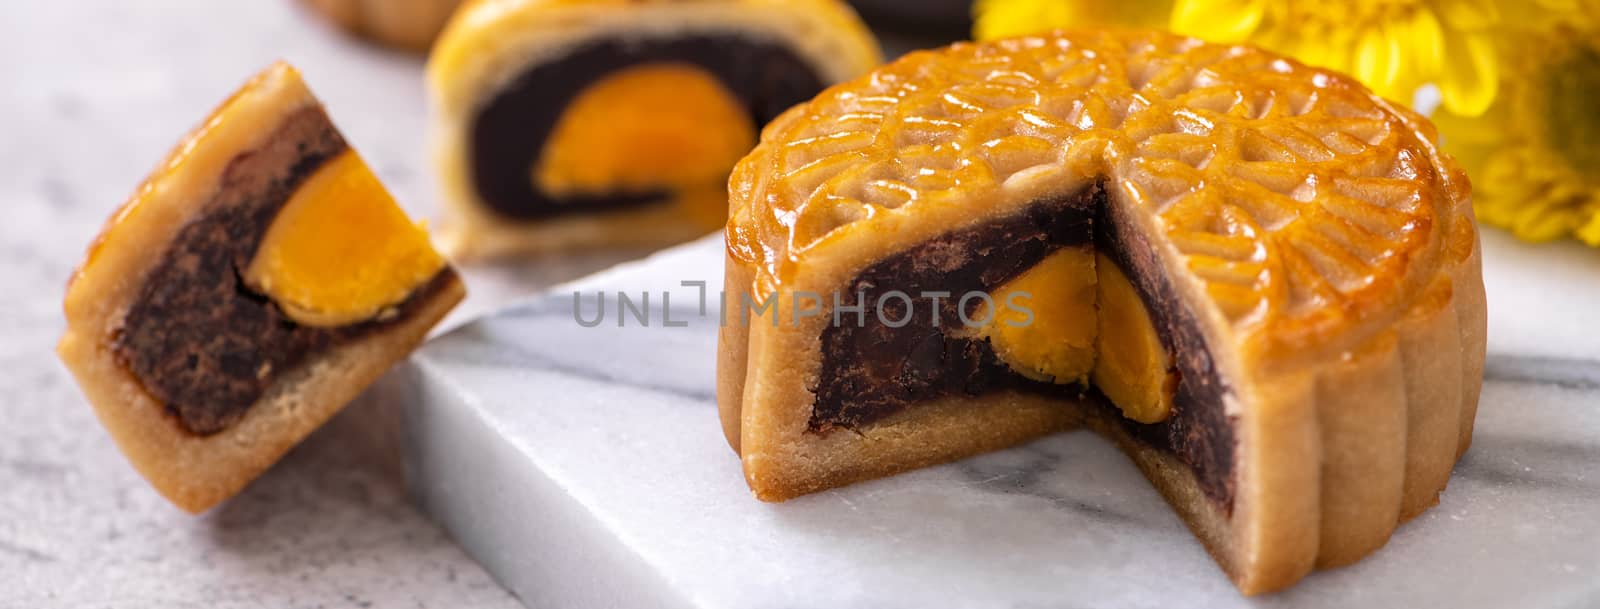 Tasty baked egg yolk pastry moon cake for Mid-Autumn Festival on by ROMIXIMAGE